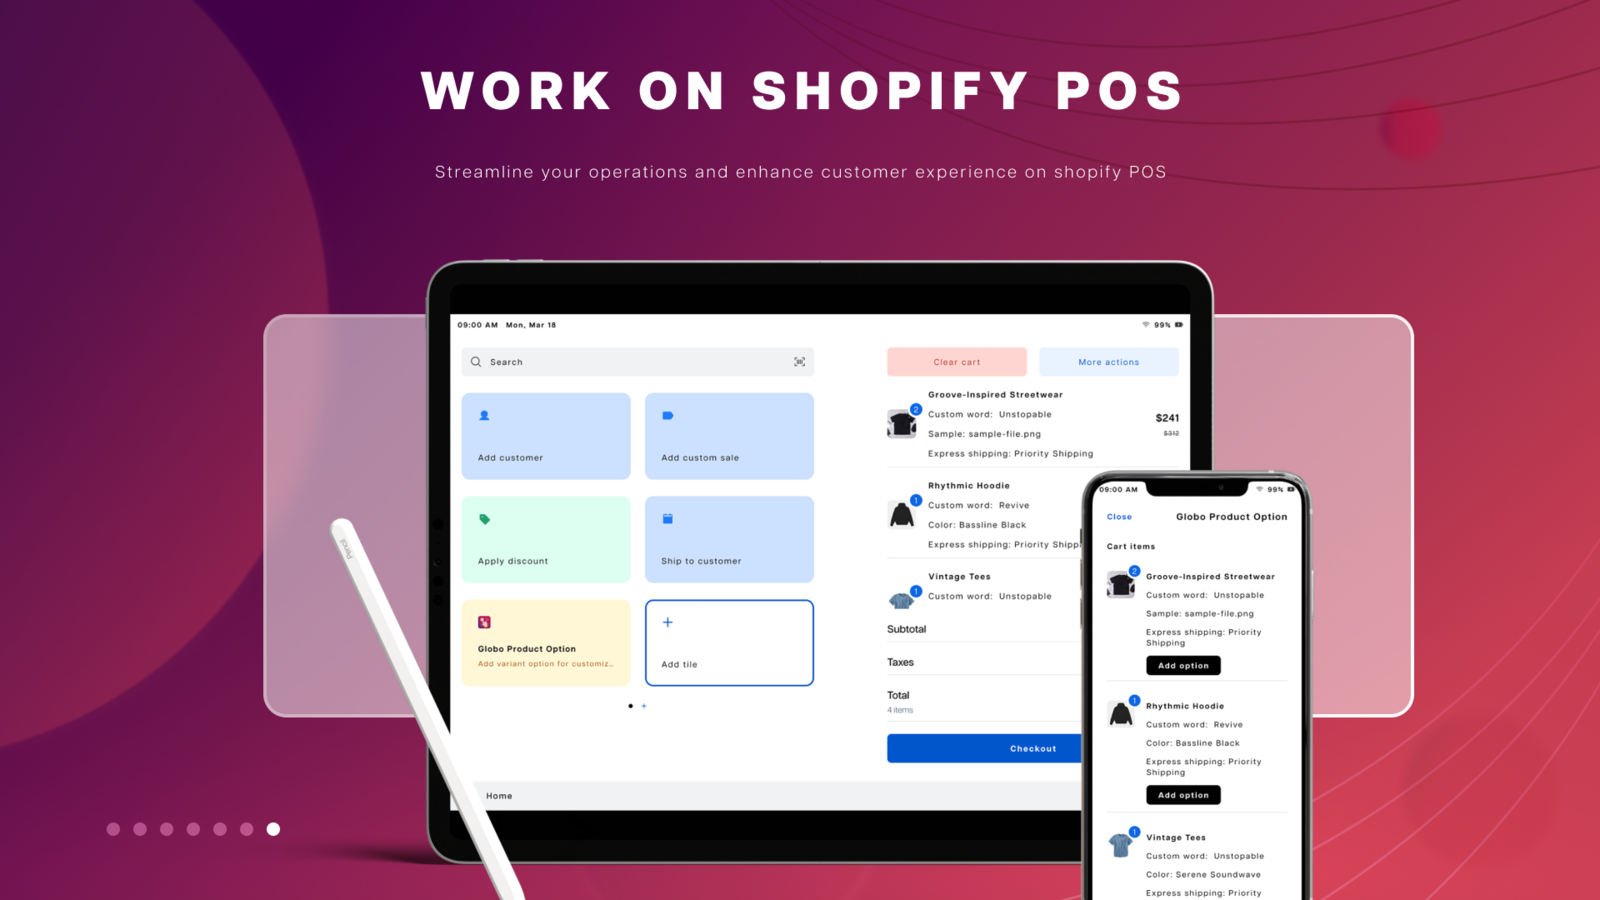 Work on Shopify POS